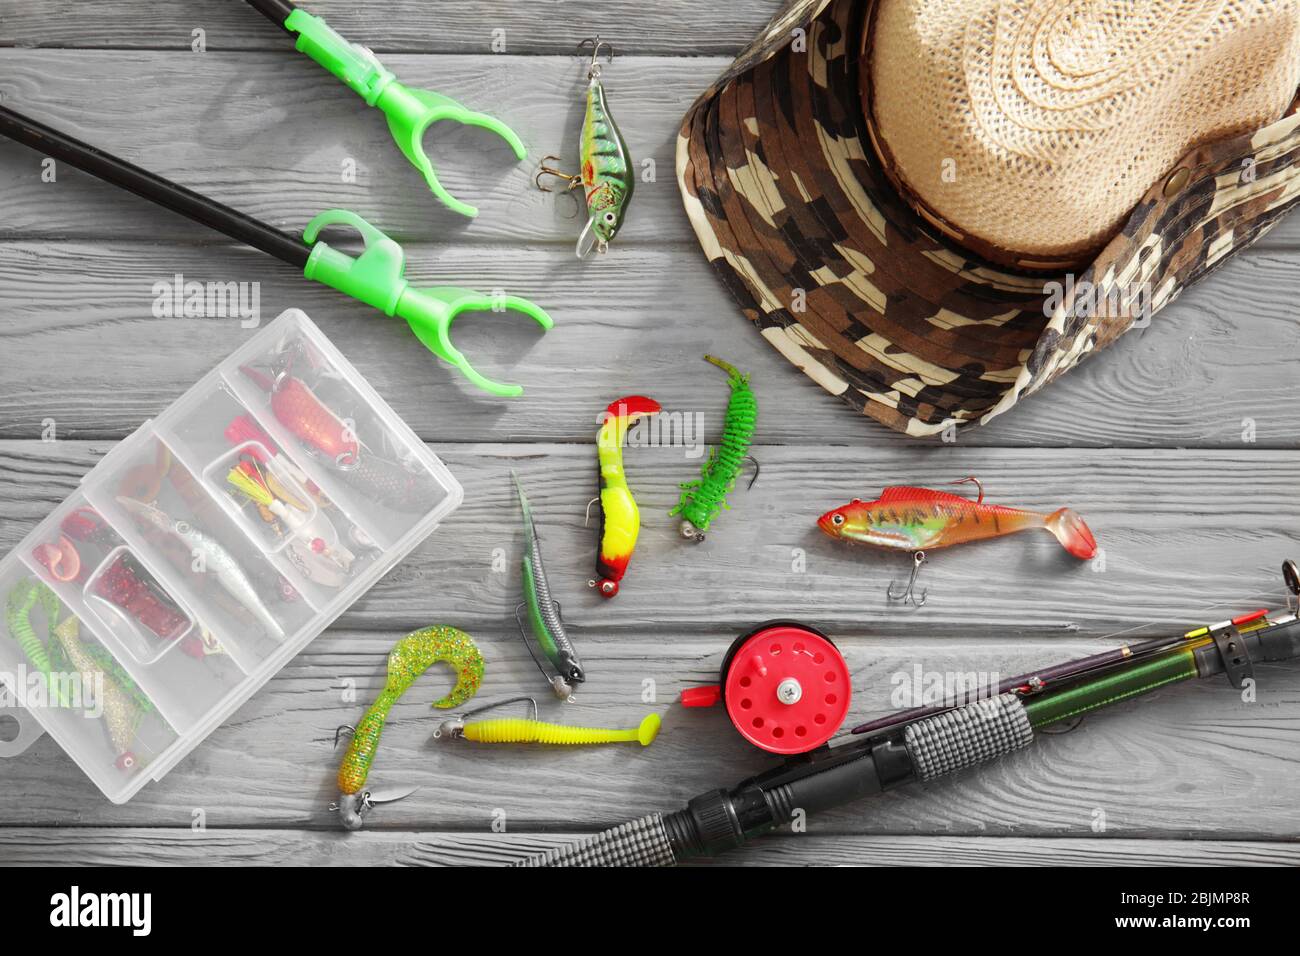 Flat lay of lure fishing tackle on a plain wooden background with